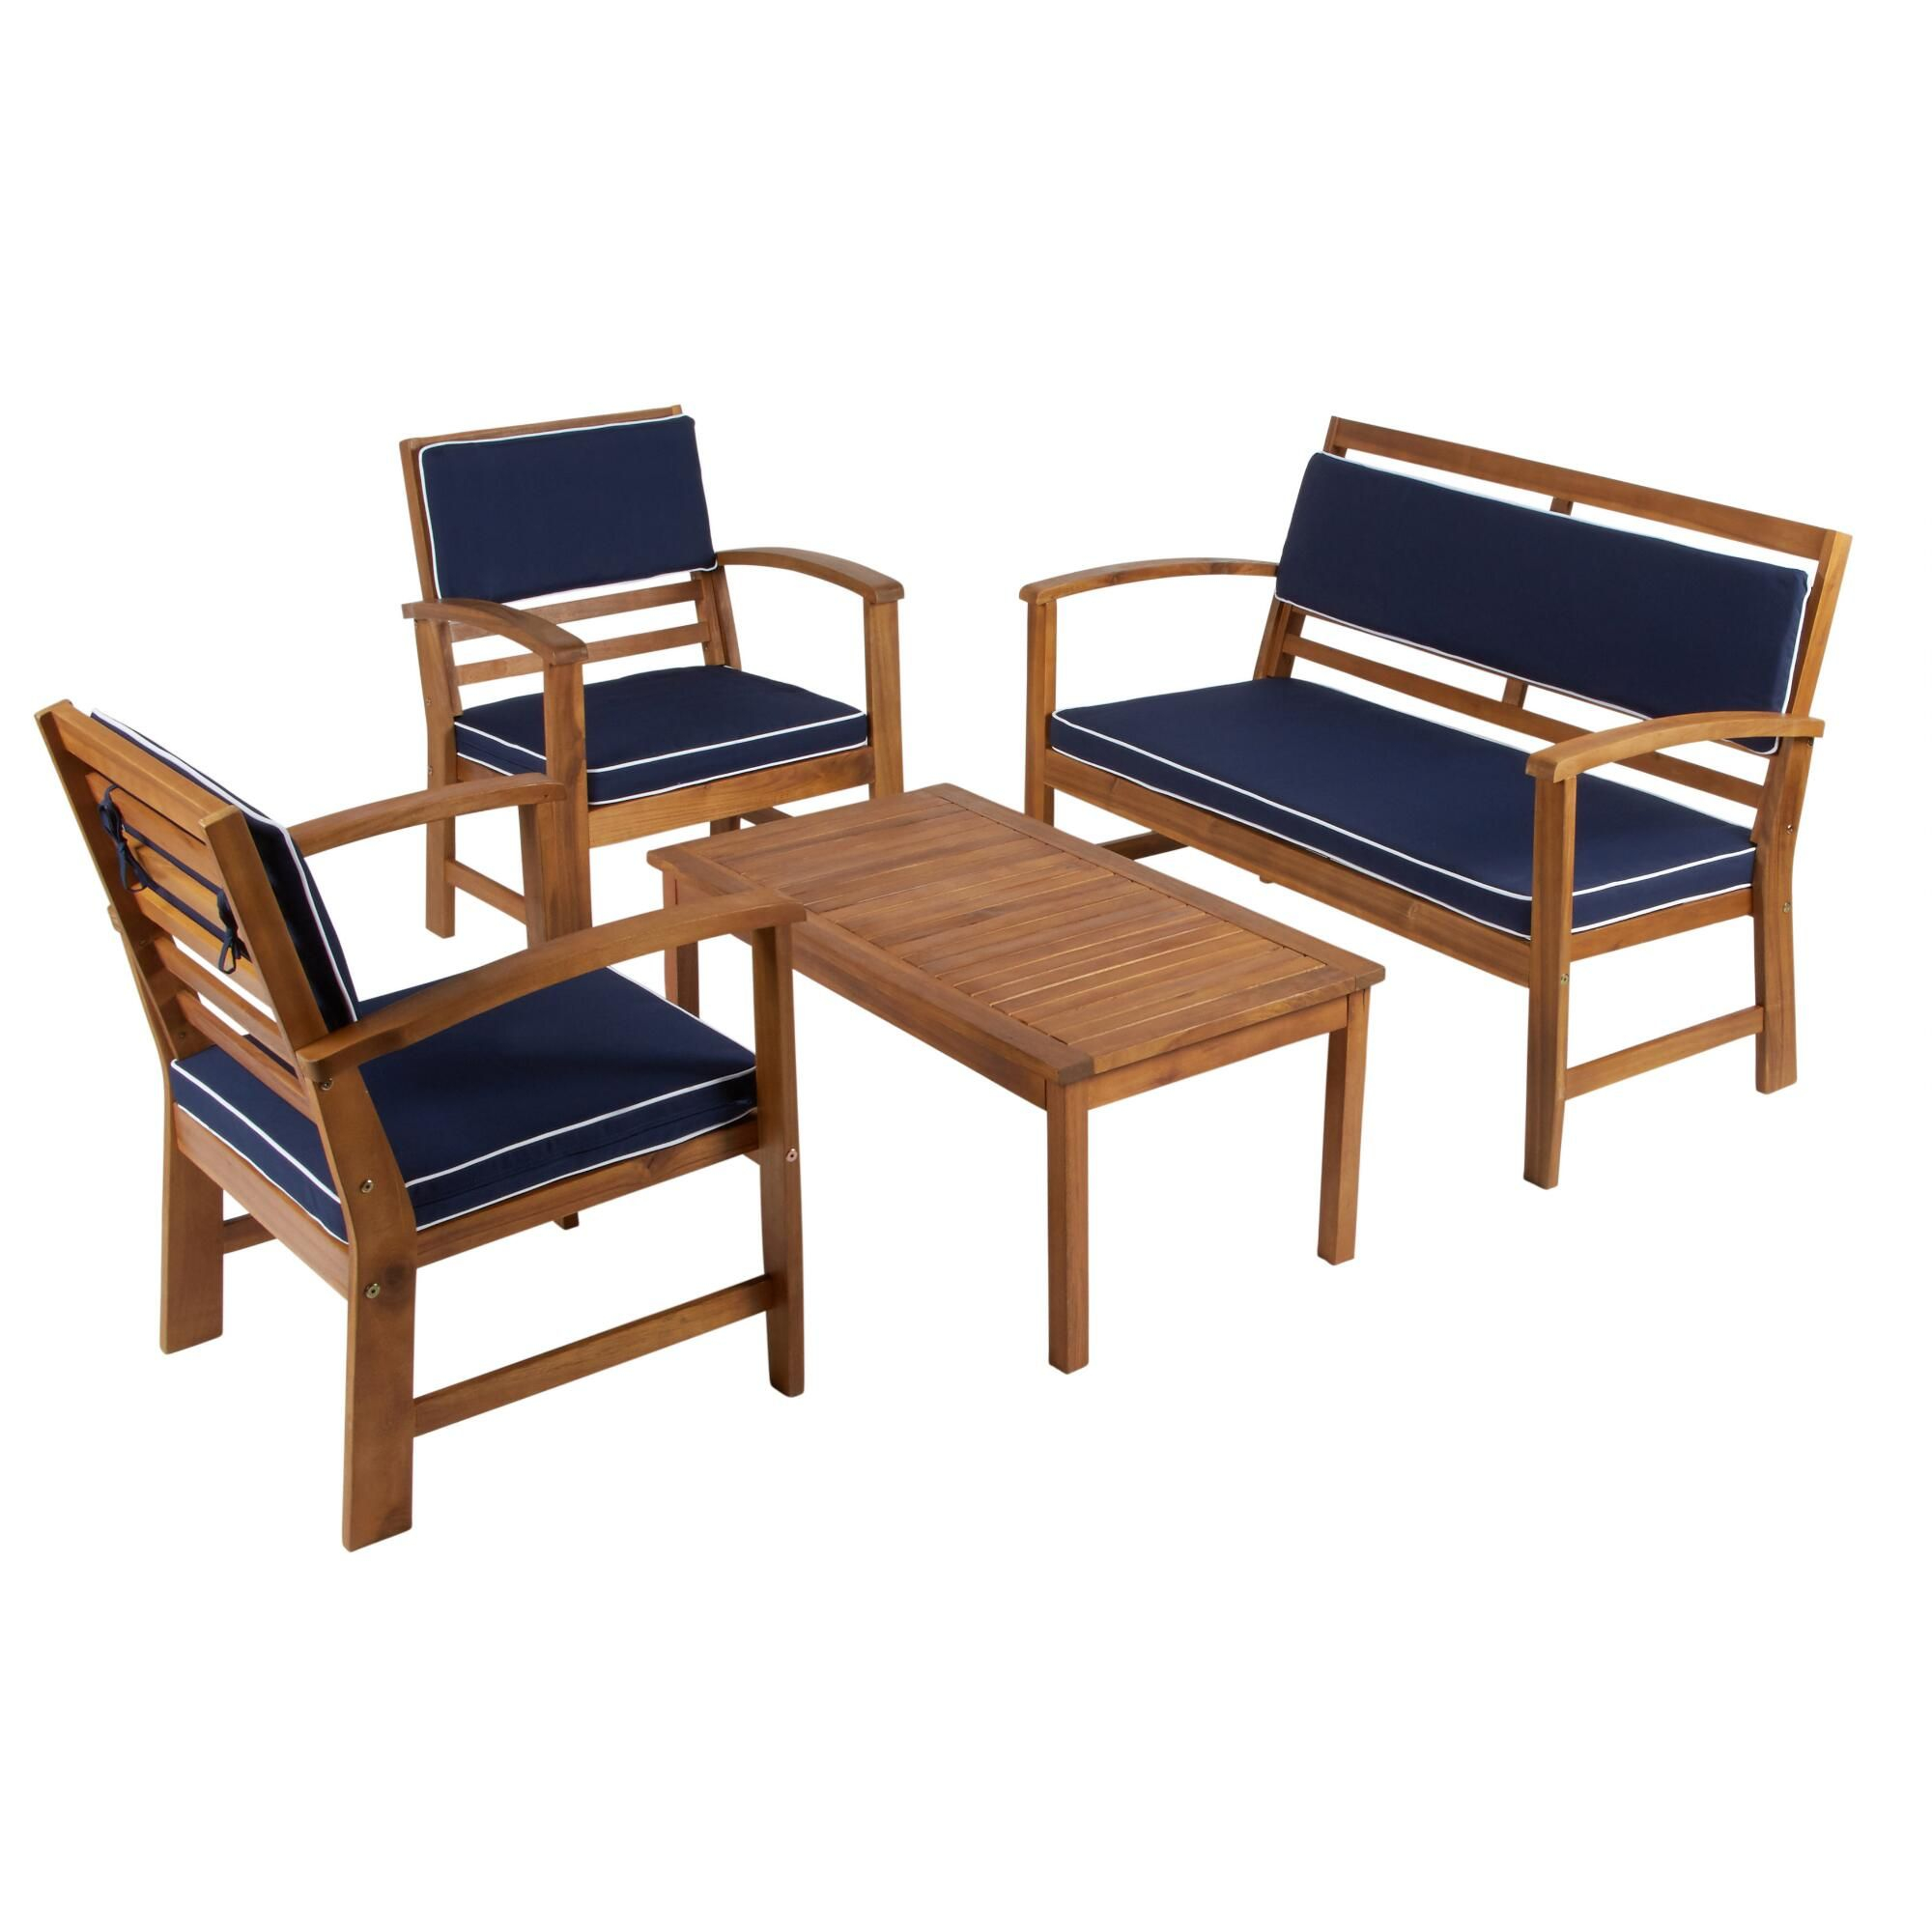 Coastal Living Seascapes Chatham Outdoor Patio Set 4 Piece pertaining to proportions 2000 X 2000